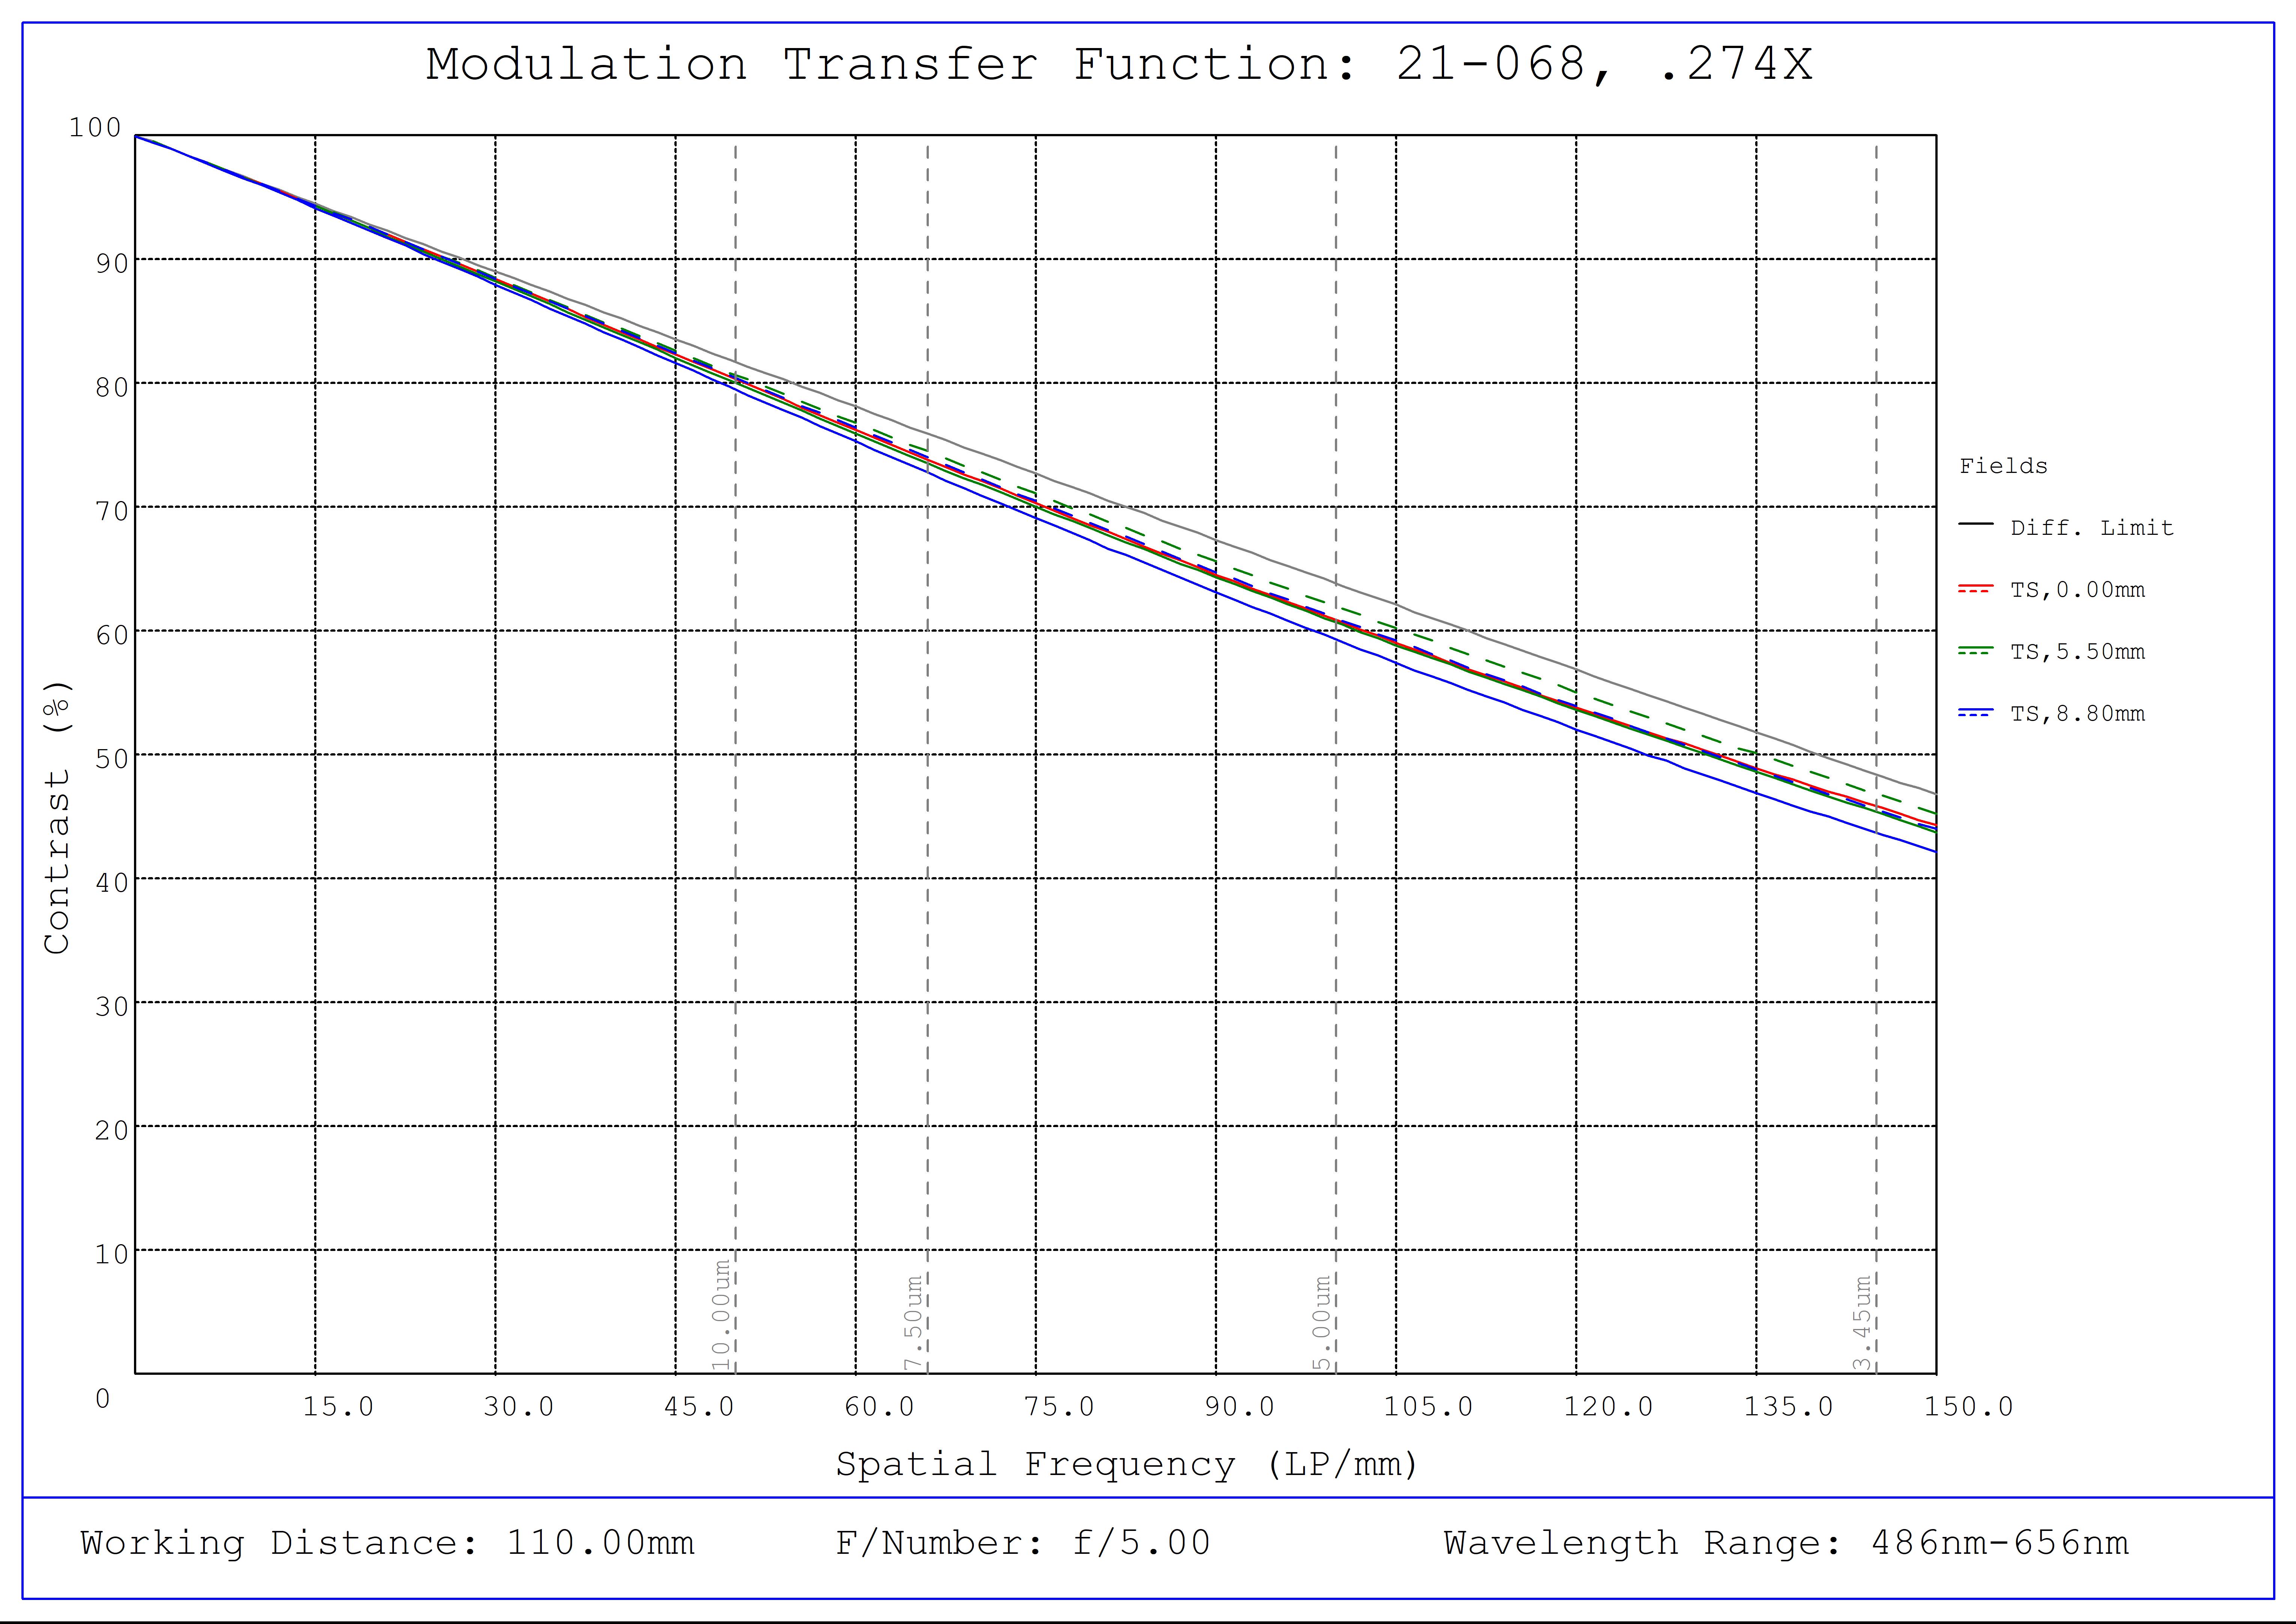 #21-068, 0.274X CobaltTL Telecentric Lens, Modulated Transfer Function (MTF) Plot, 110mm Working Distance, f5
